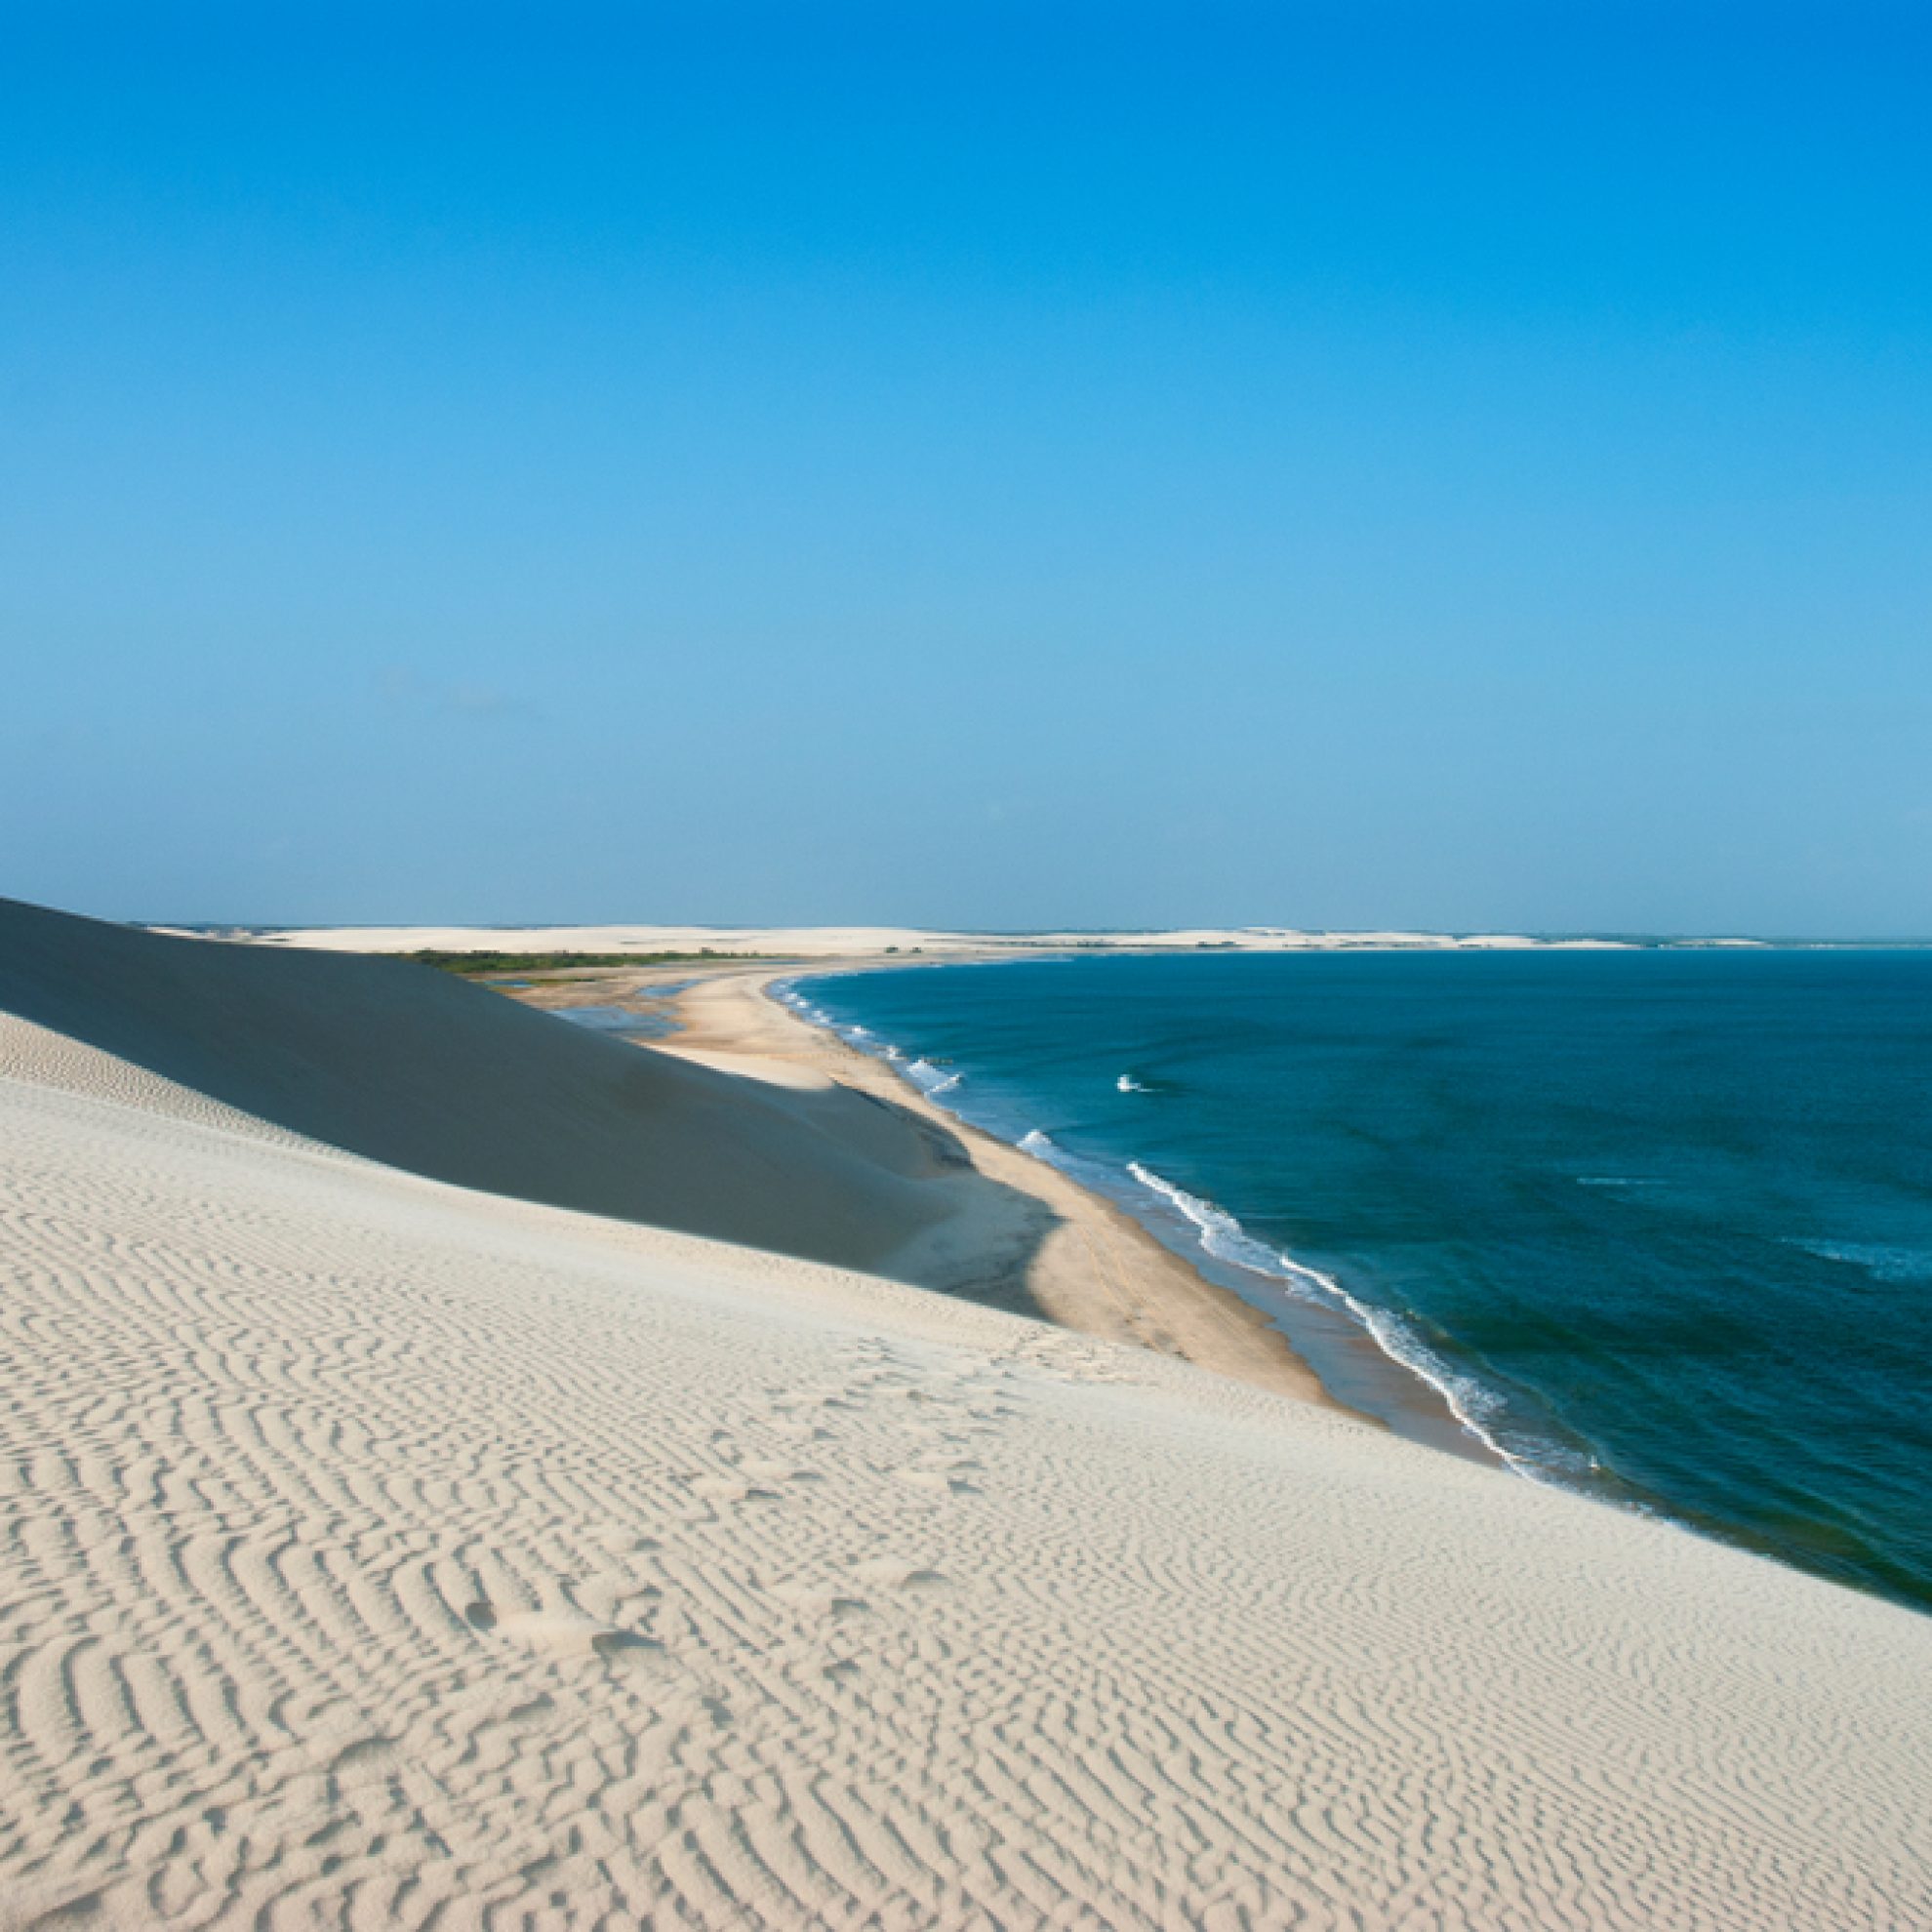 View,Of,The,Dune,In,Jericoacoara,,Cearã¡,,Brazil